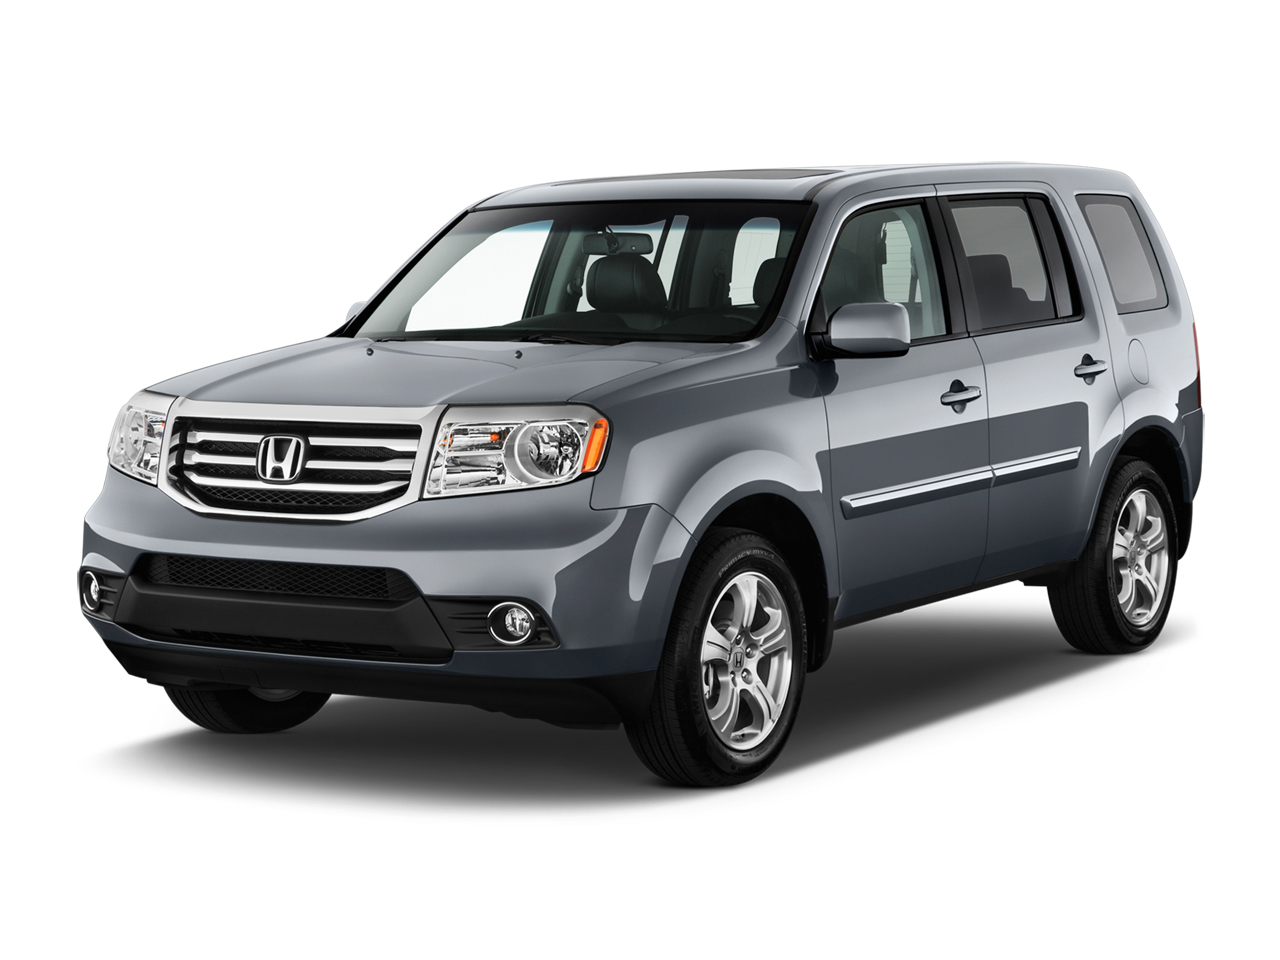 2012 Honda Pilot Review Ratings Specs Prices And Photos